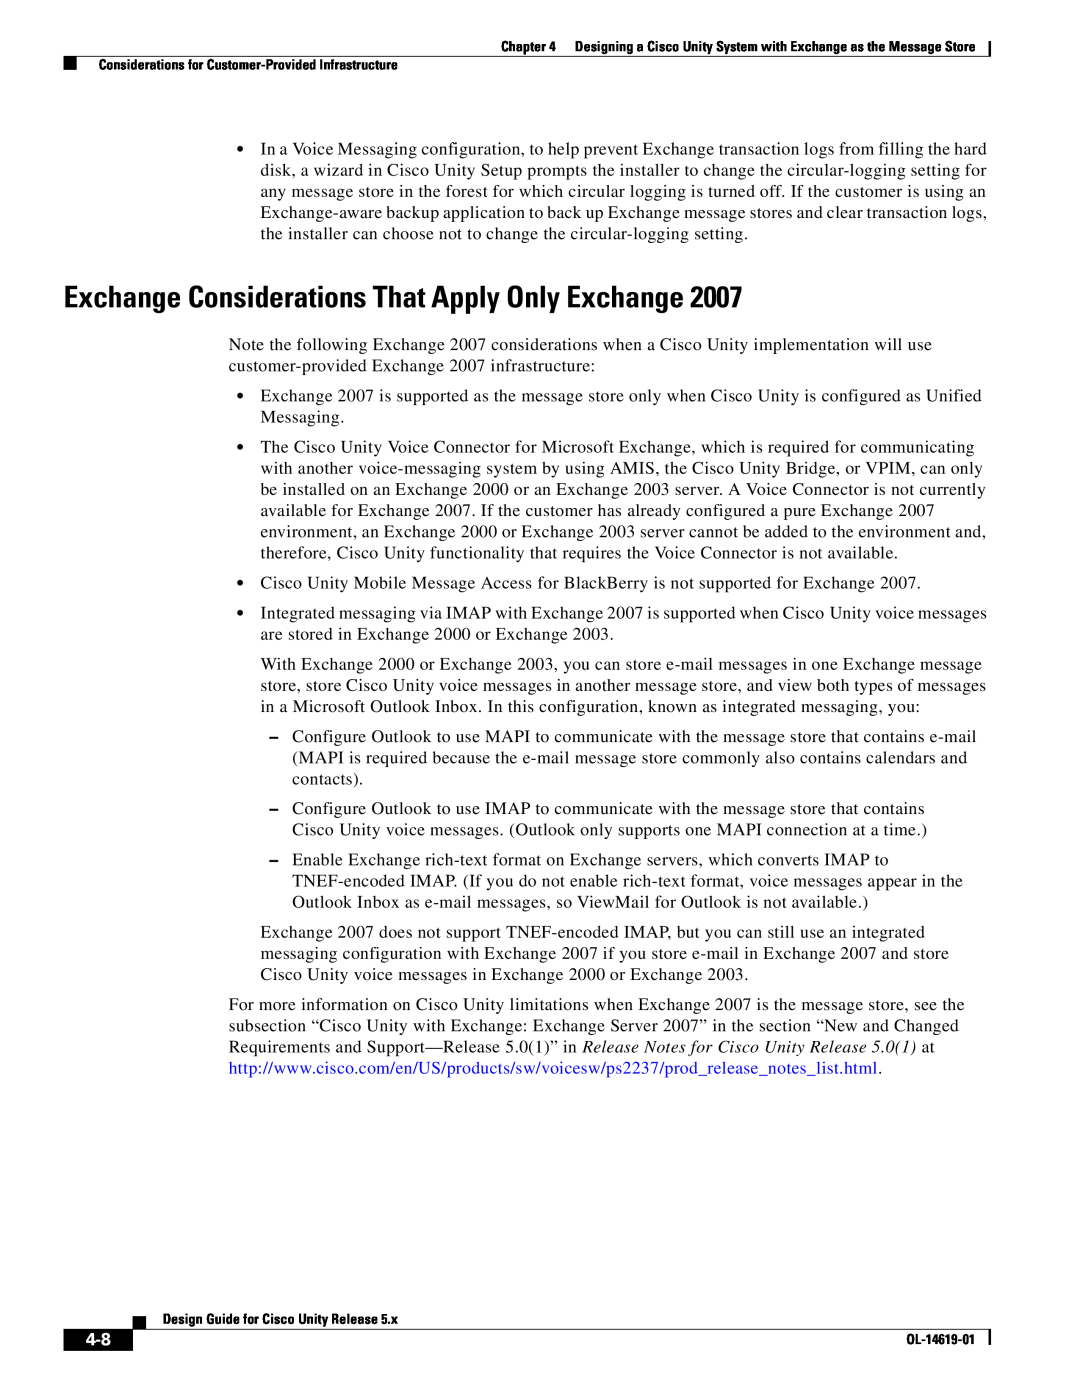 Cisco Systems OL-14619-01 manual Exchange Considerations That Apply Only Exchange 